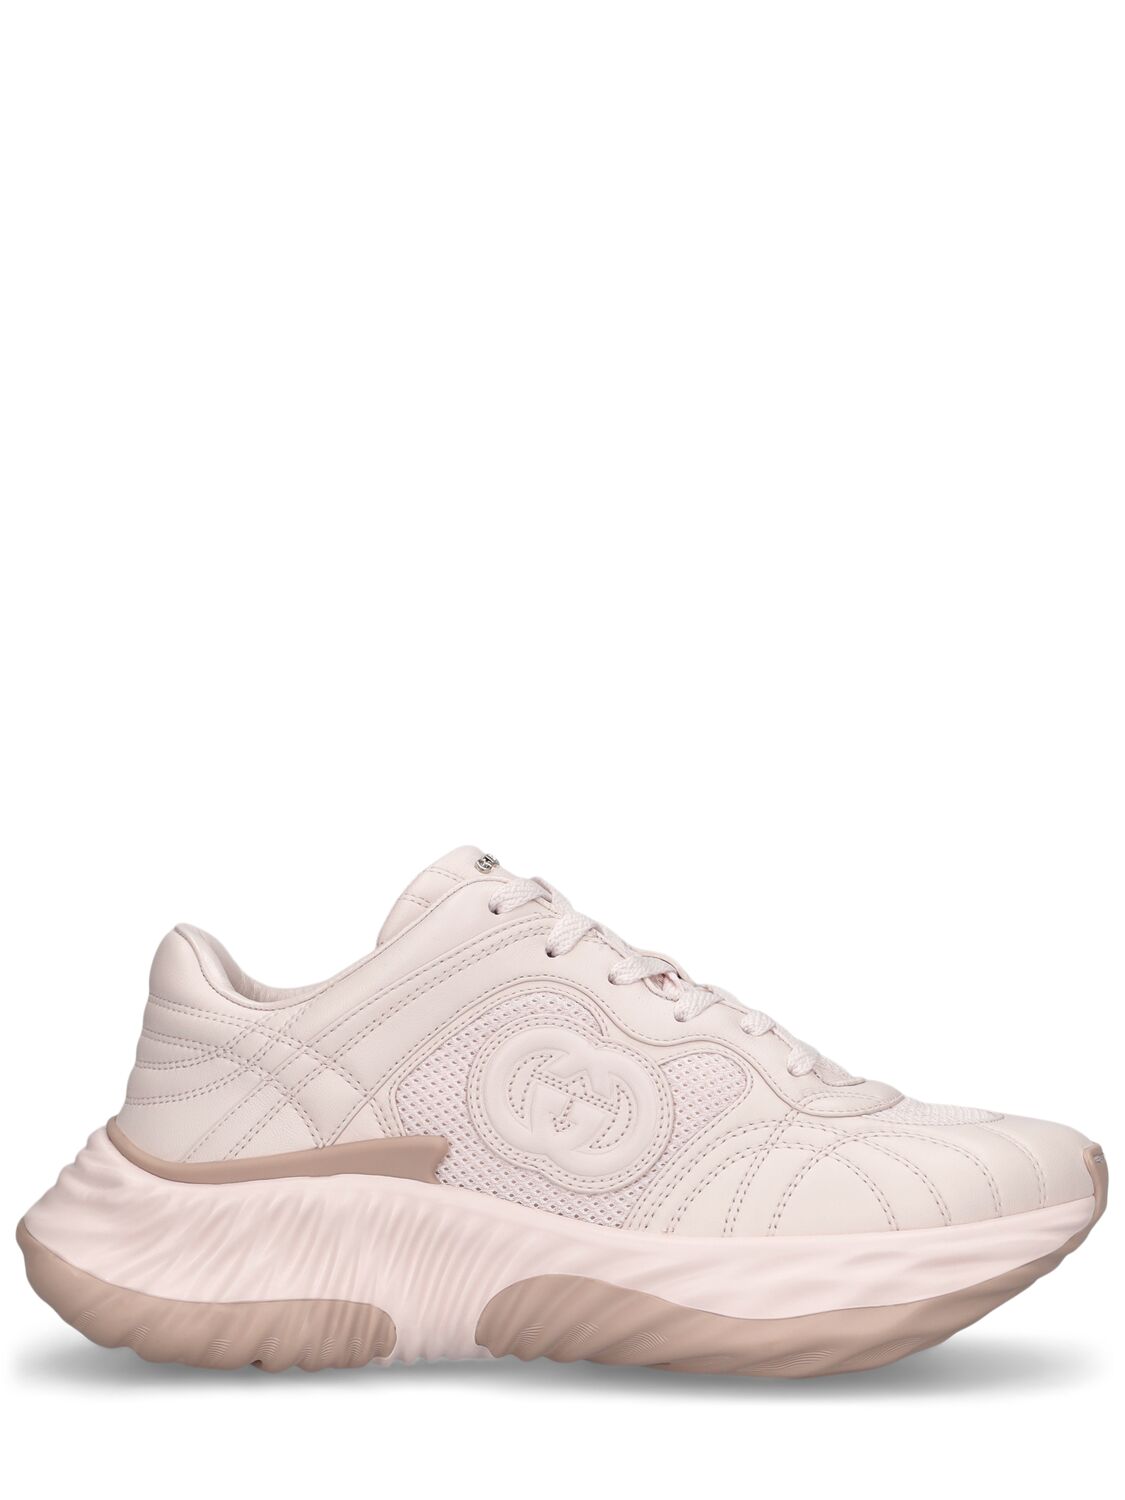 Gucci 65mm Ripple Leather Sneakers In Pink